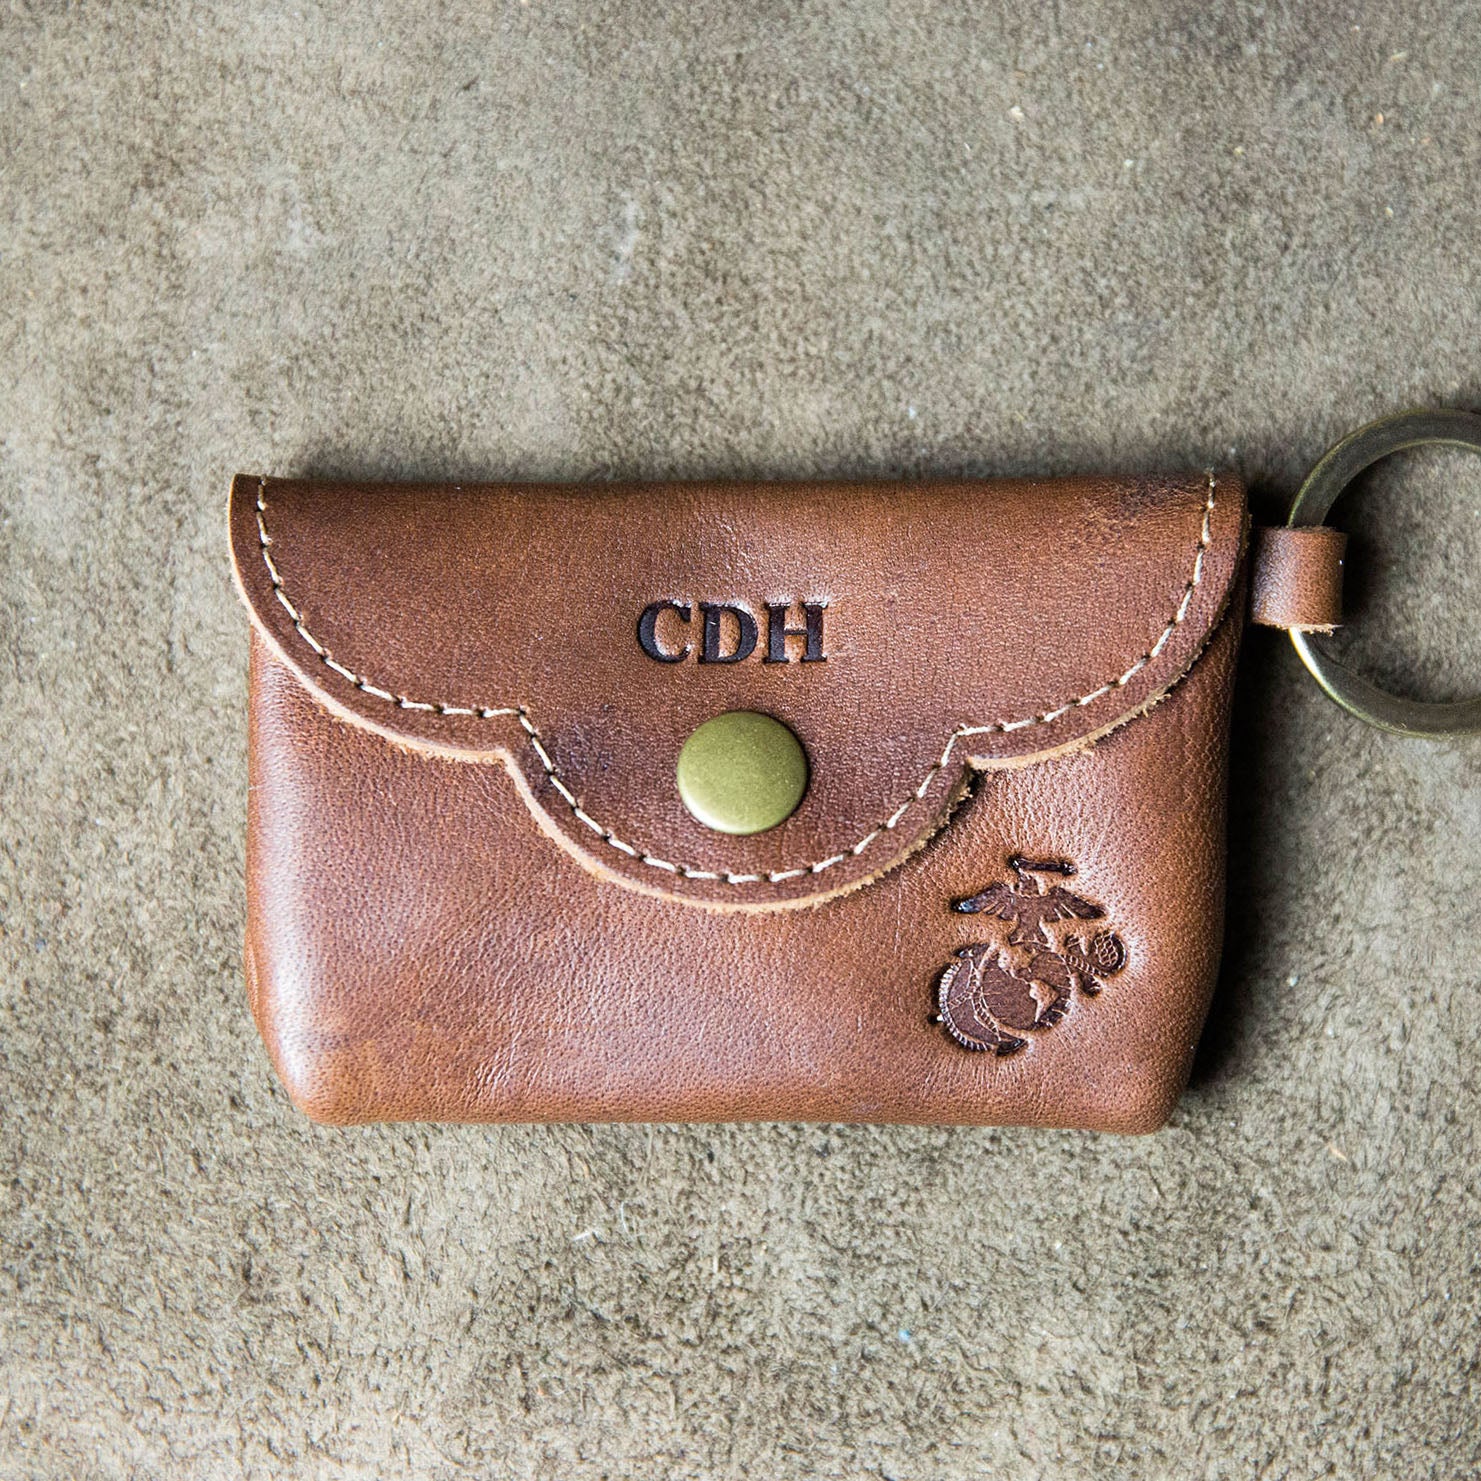 Fine leather scallop wallet keychain with Marine Corps logo